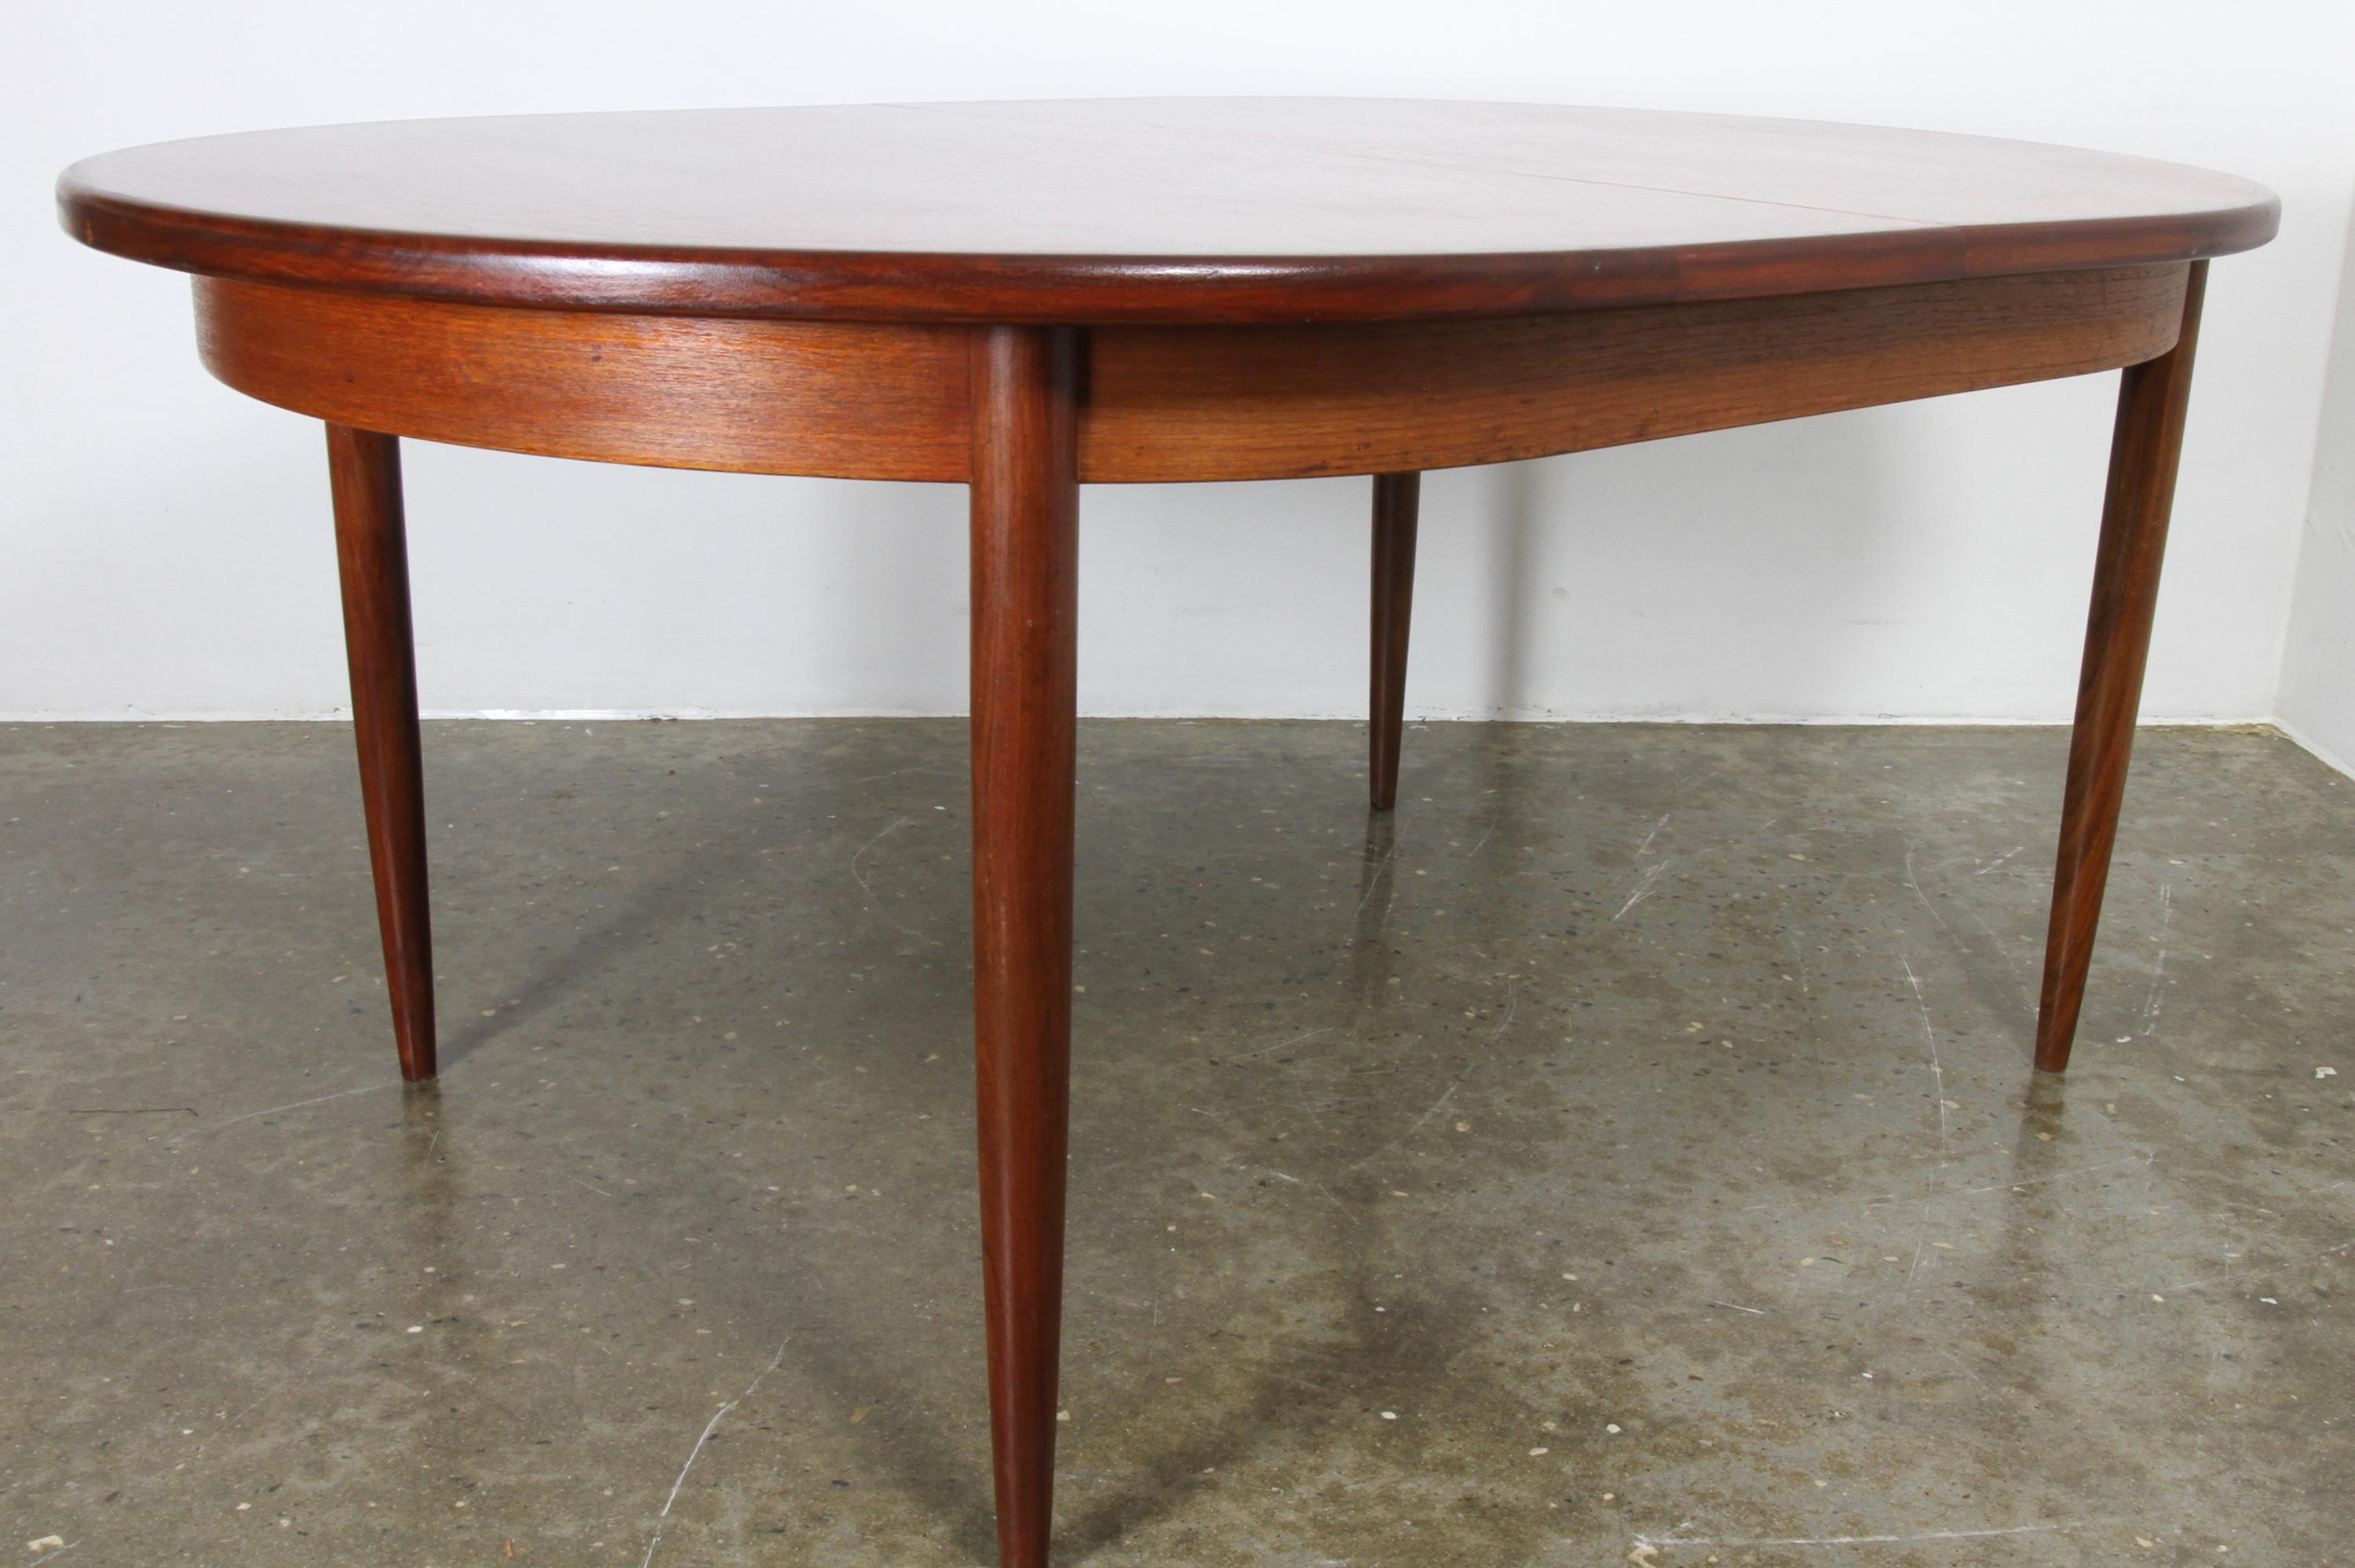 Vintage oval extendable teak and redwood dining table by G-Plan 1960s.
Designed by Danish designer Ib Kofod-Larsen. Large Mid-Century Modern table from G Plan in reddish/brown tones with elegant round tapered legs. Classic midmod item. Pleasing on